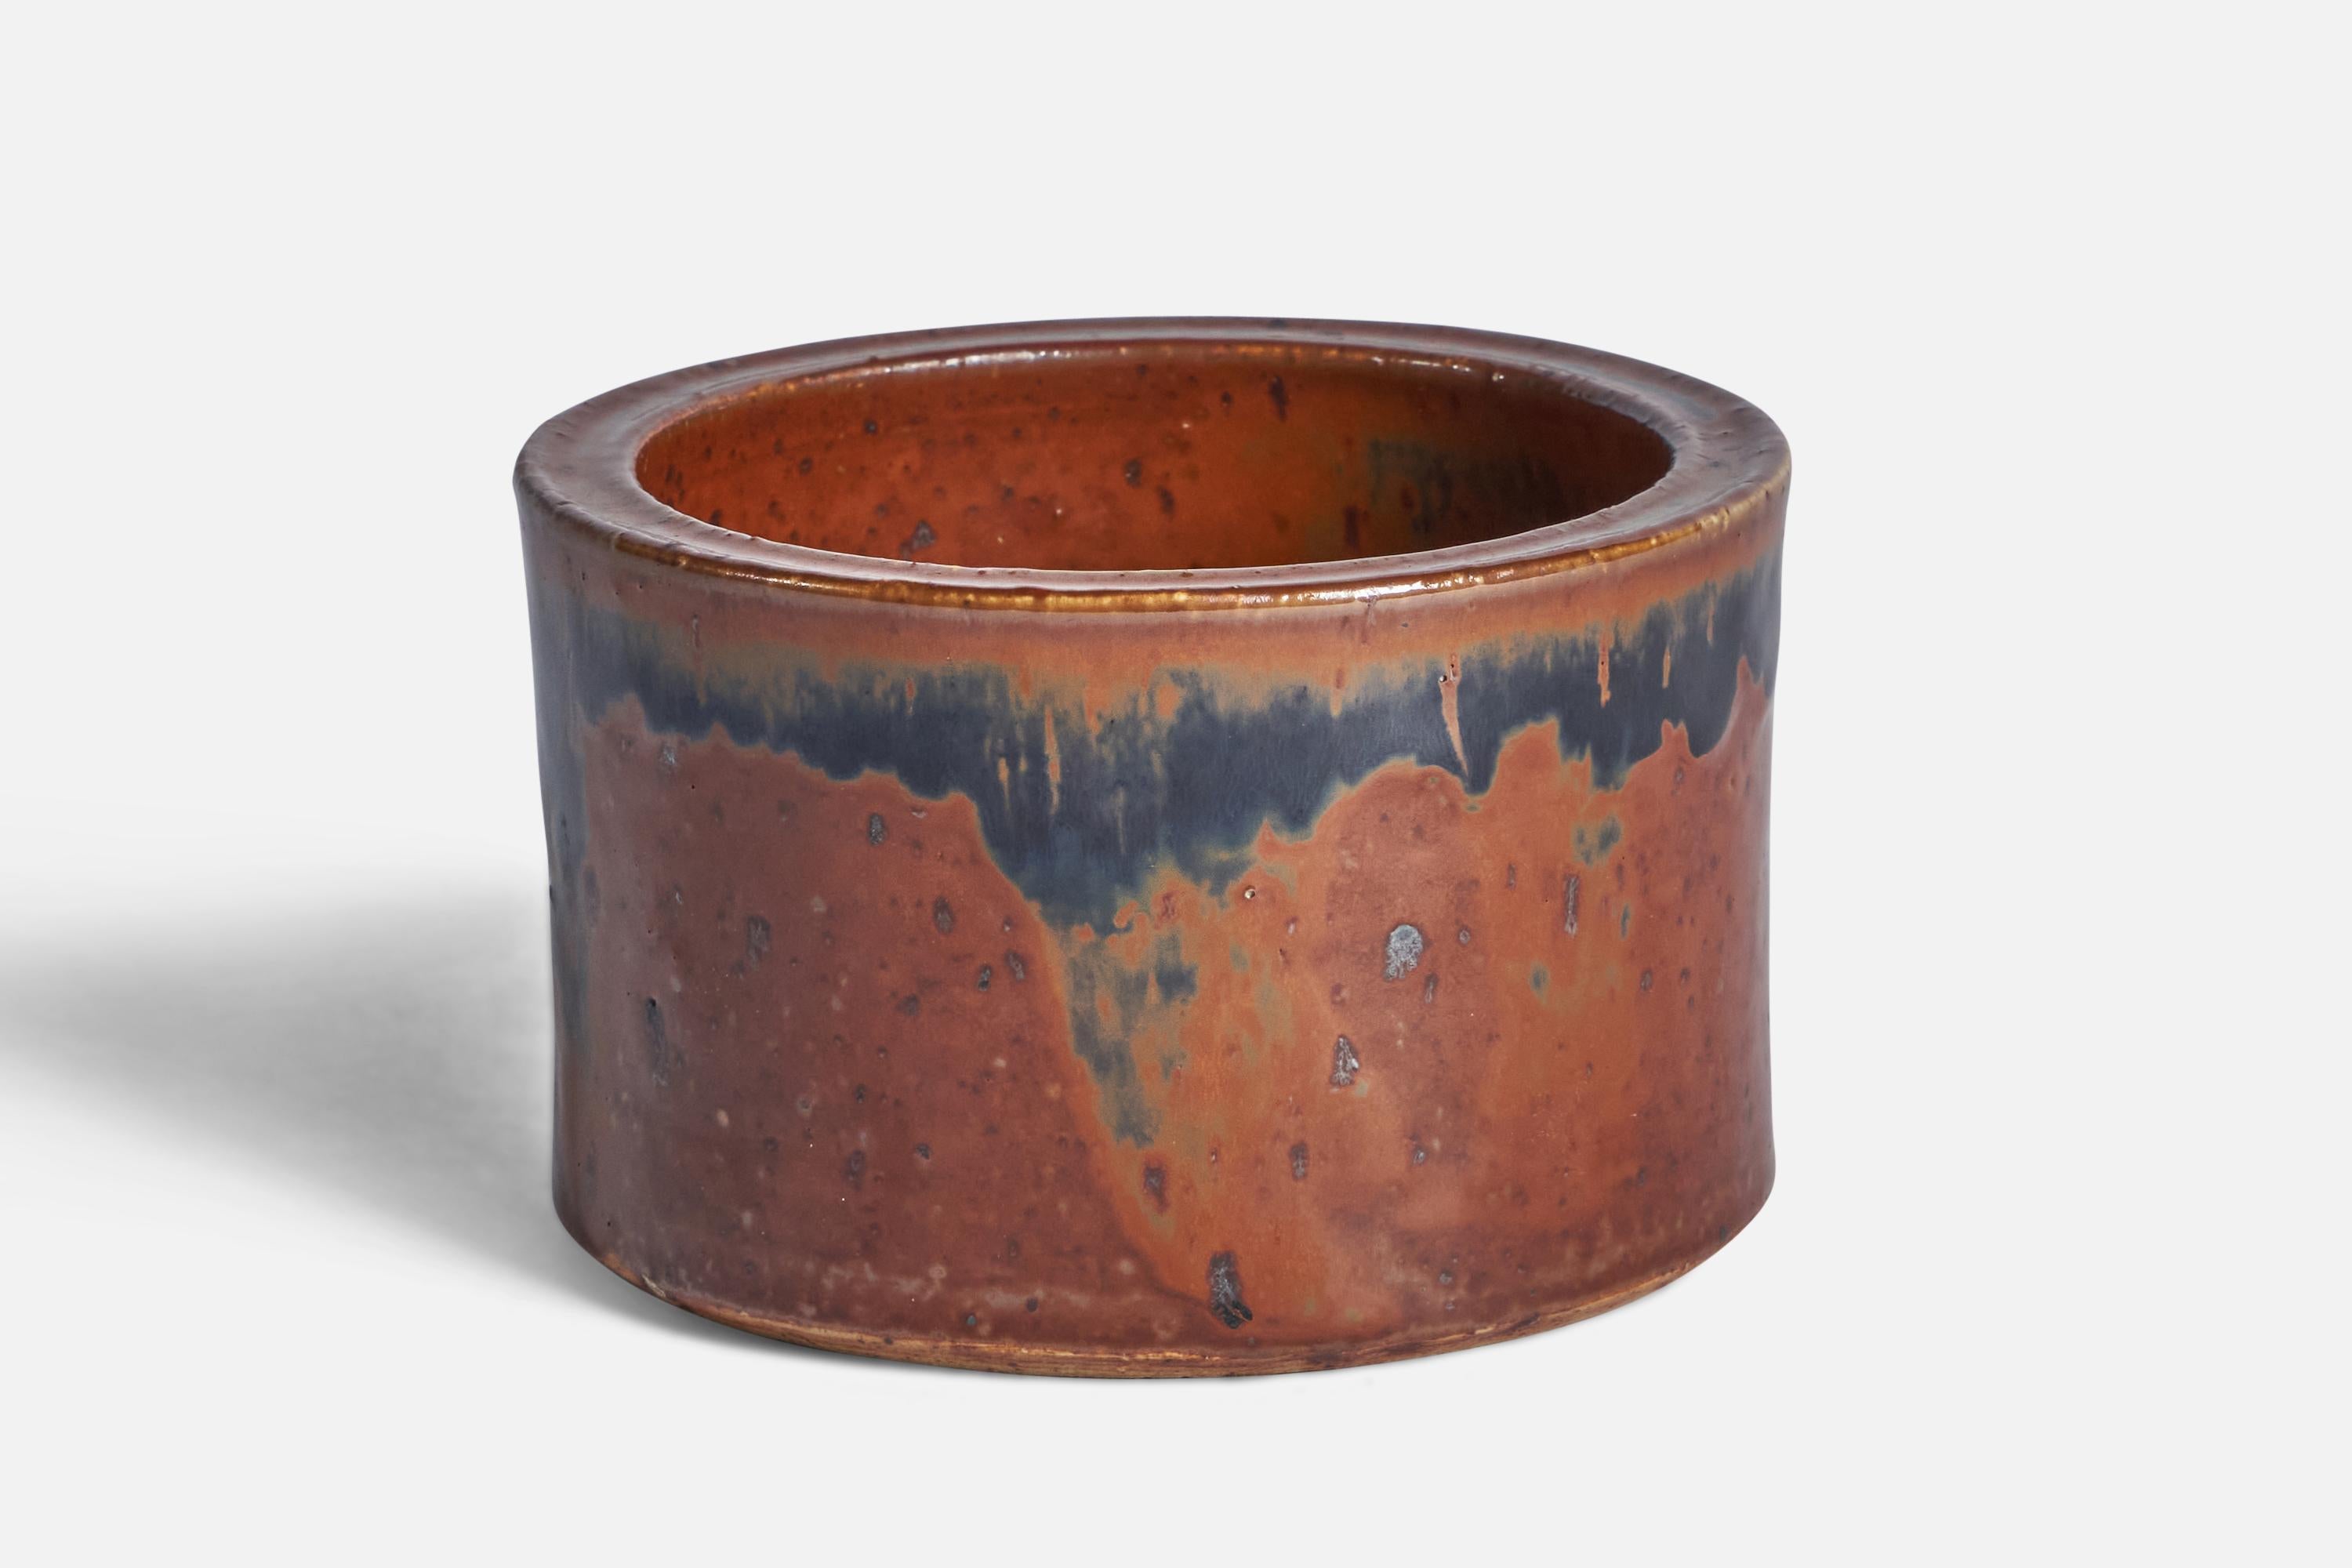 A red and blue-glazed stoneware bowl designed by Marianne Westman and produced by Rörstrand, Sweden, 1950s.